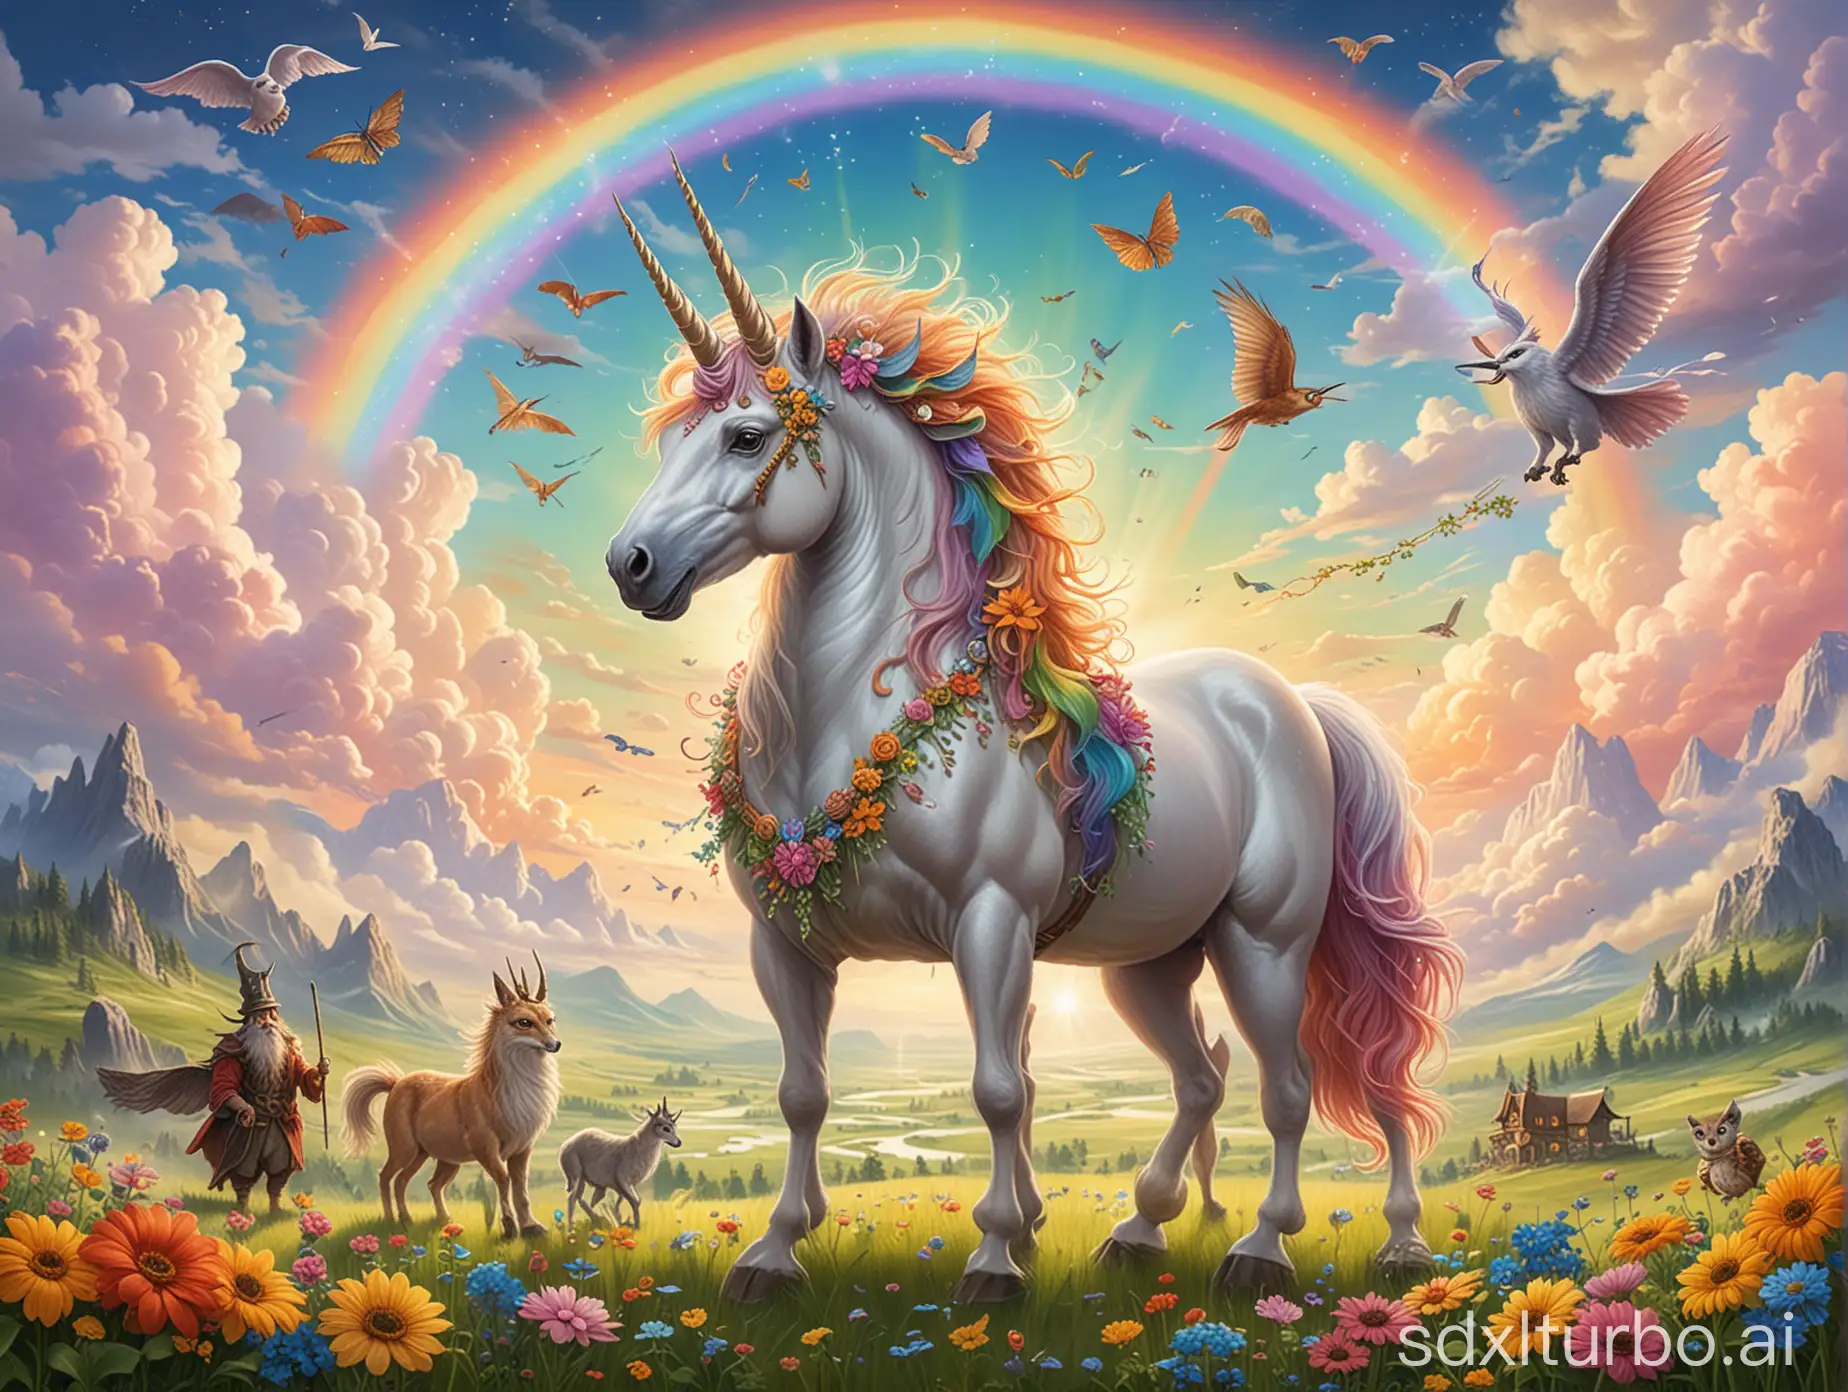 A vibrant and whimsical illustration featuring a diverse array of mythical creatures gathered together. A majestic unicorn with a sparkling horn stands in the center, surrounded by a mischievous leprechaun, a wise owl with a magical staff, and a playful dragon with a rainbow tail. The background is a soft pastel sky with fluffy clouds, and a lush green meadow with colorful flowers. This charming scene is perfect for a greeting card, evoking warmth and wonder.